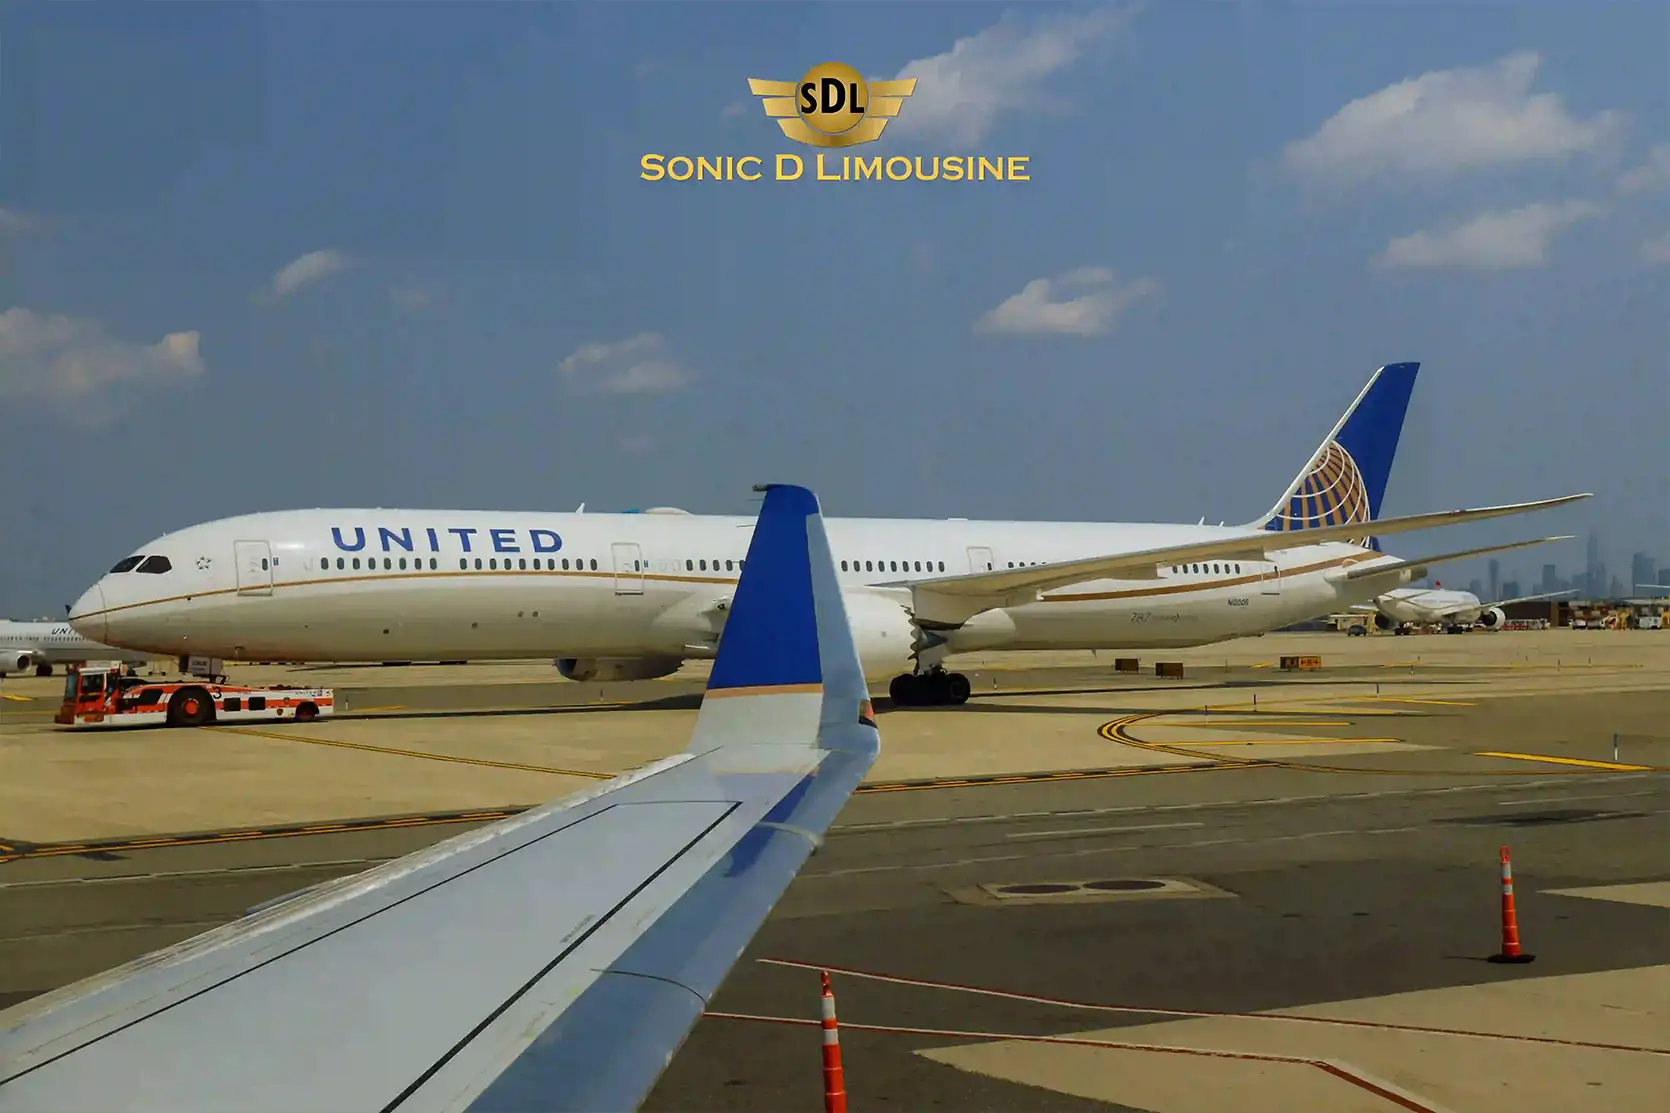 Sonic D Limousine A united airlines airplane parked at an airport.